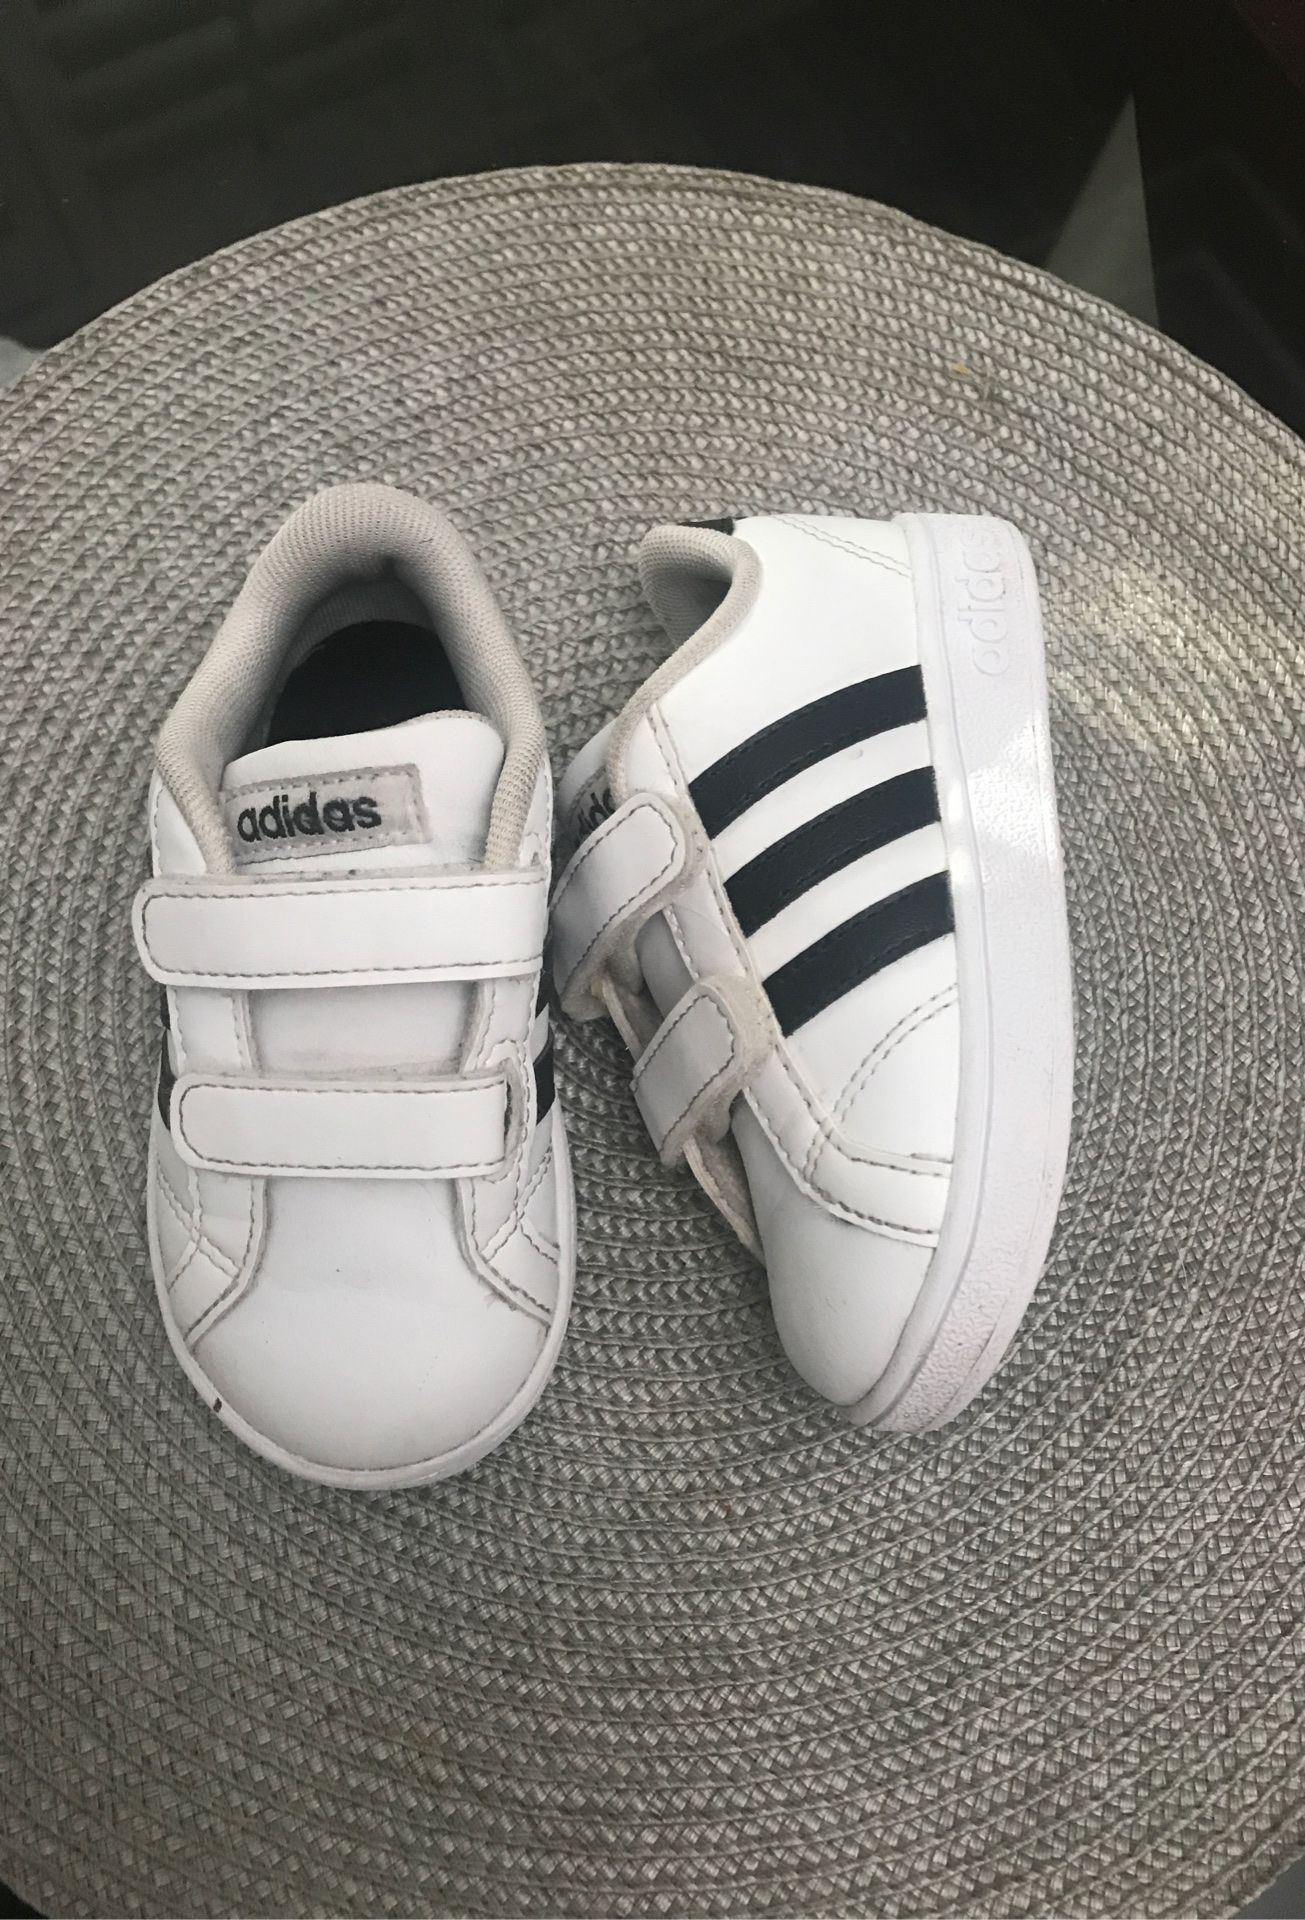 Toddler Adidas Shoes size 6